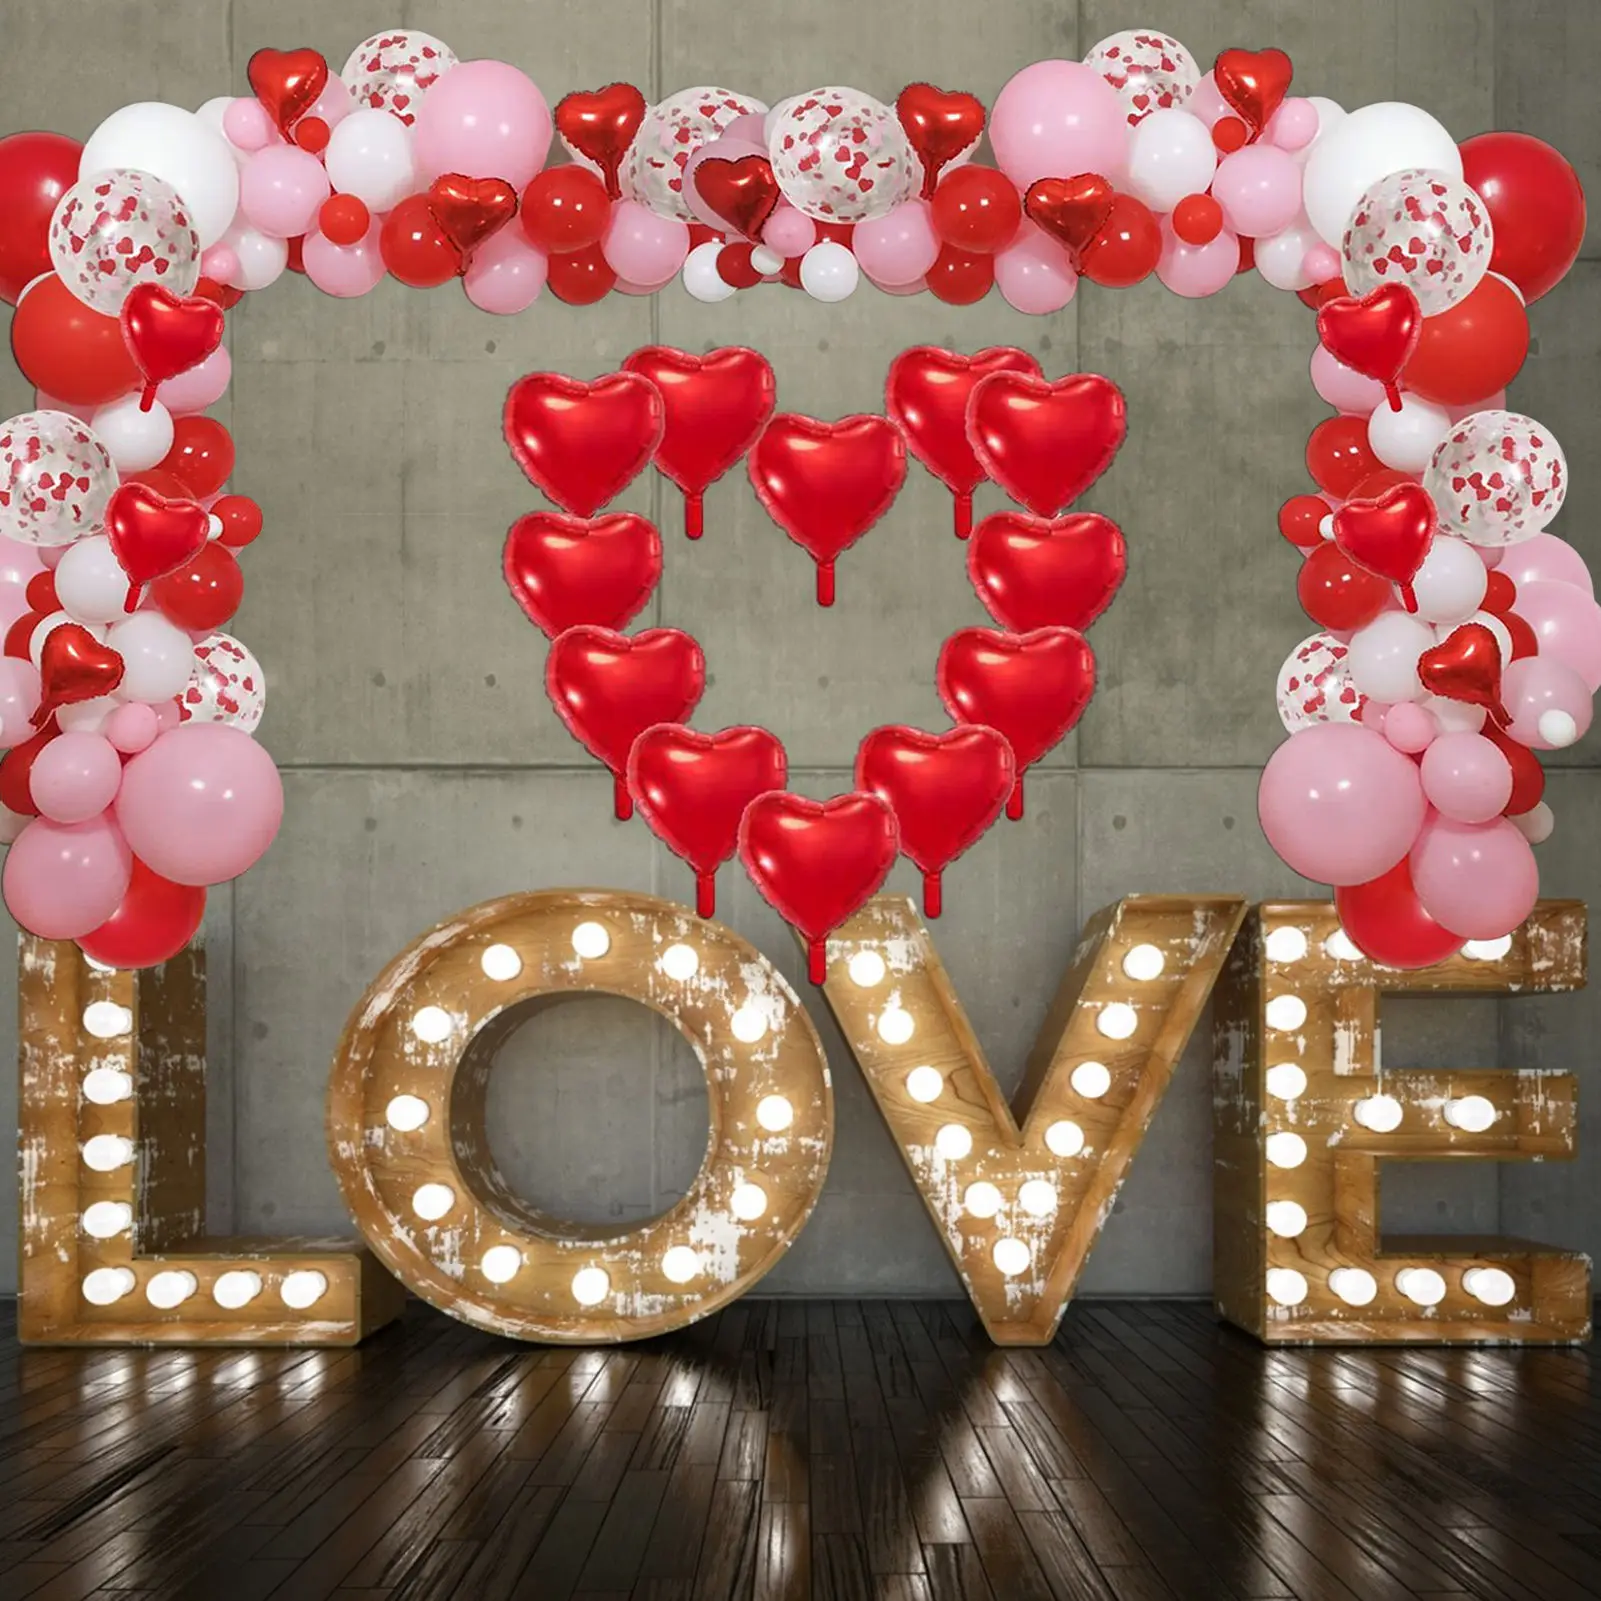 QUALITY 10 inch HEART SHAPE Red and White Balloons For Anniversary and Parties